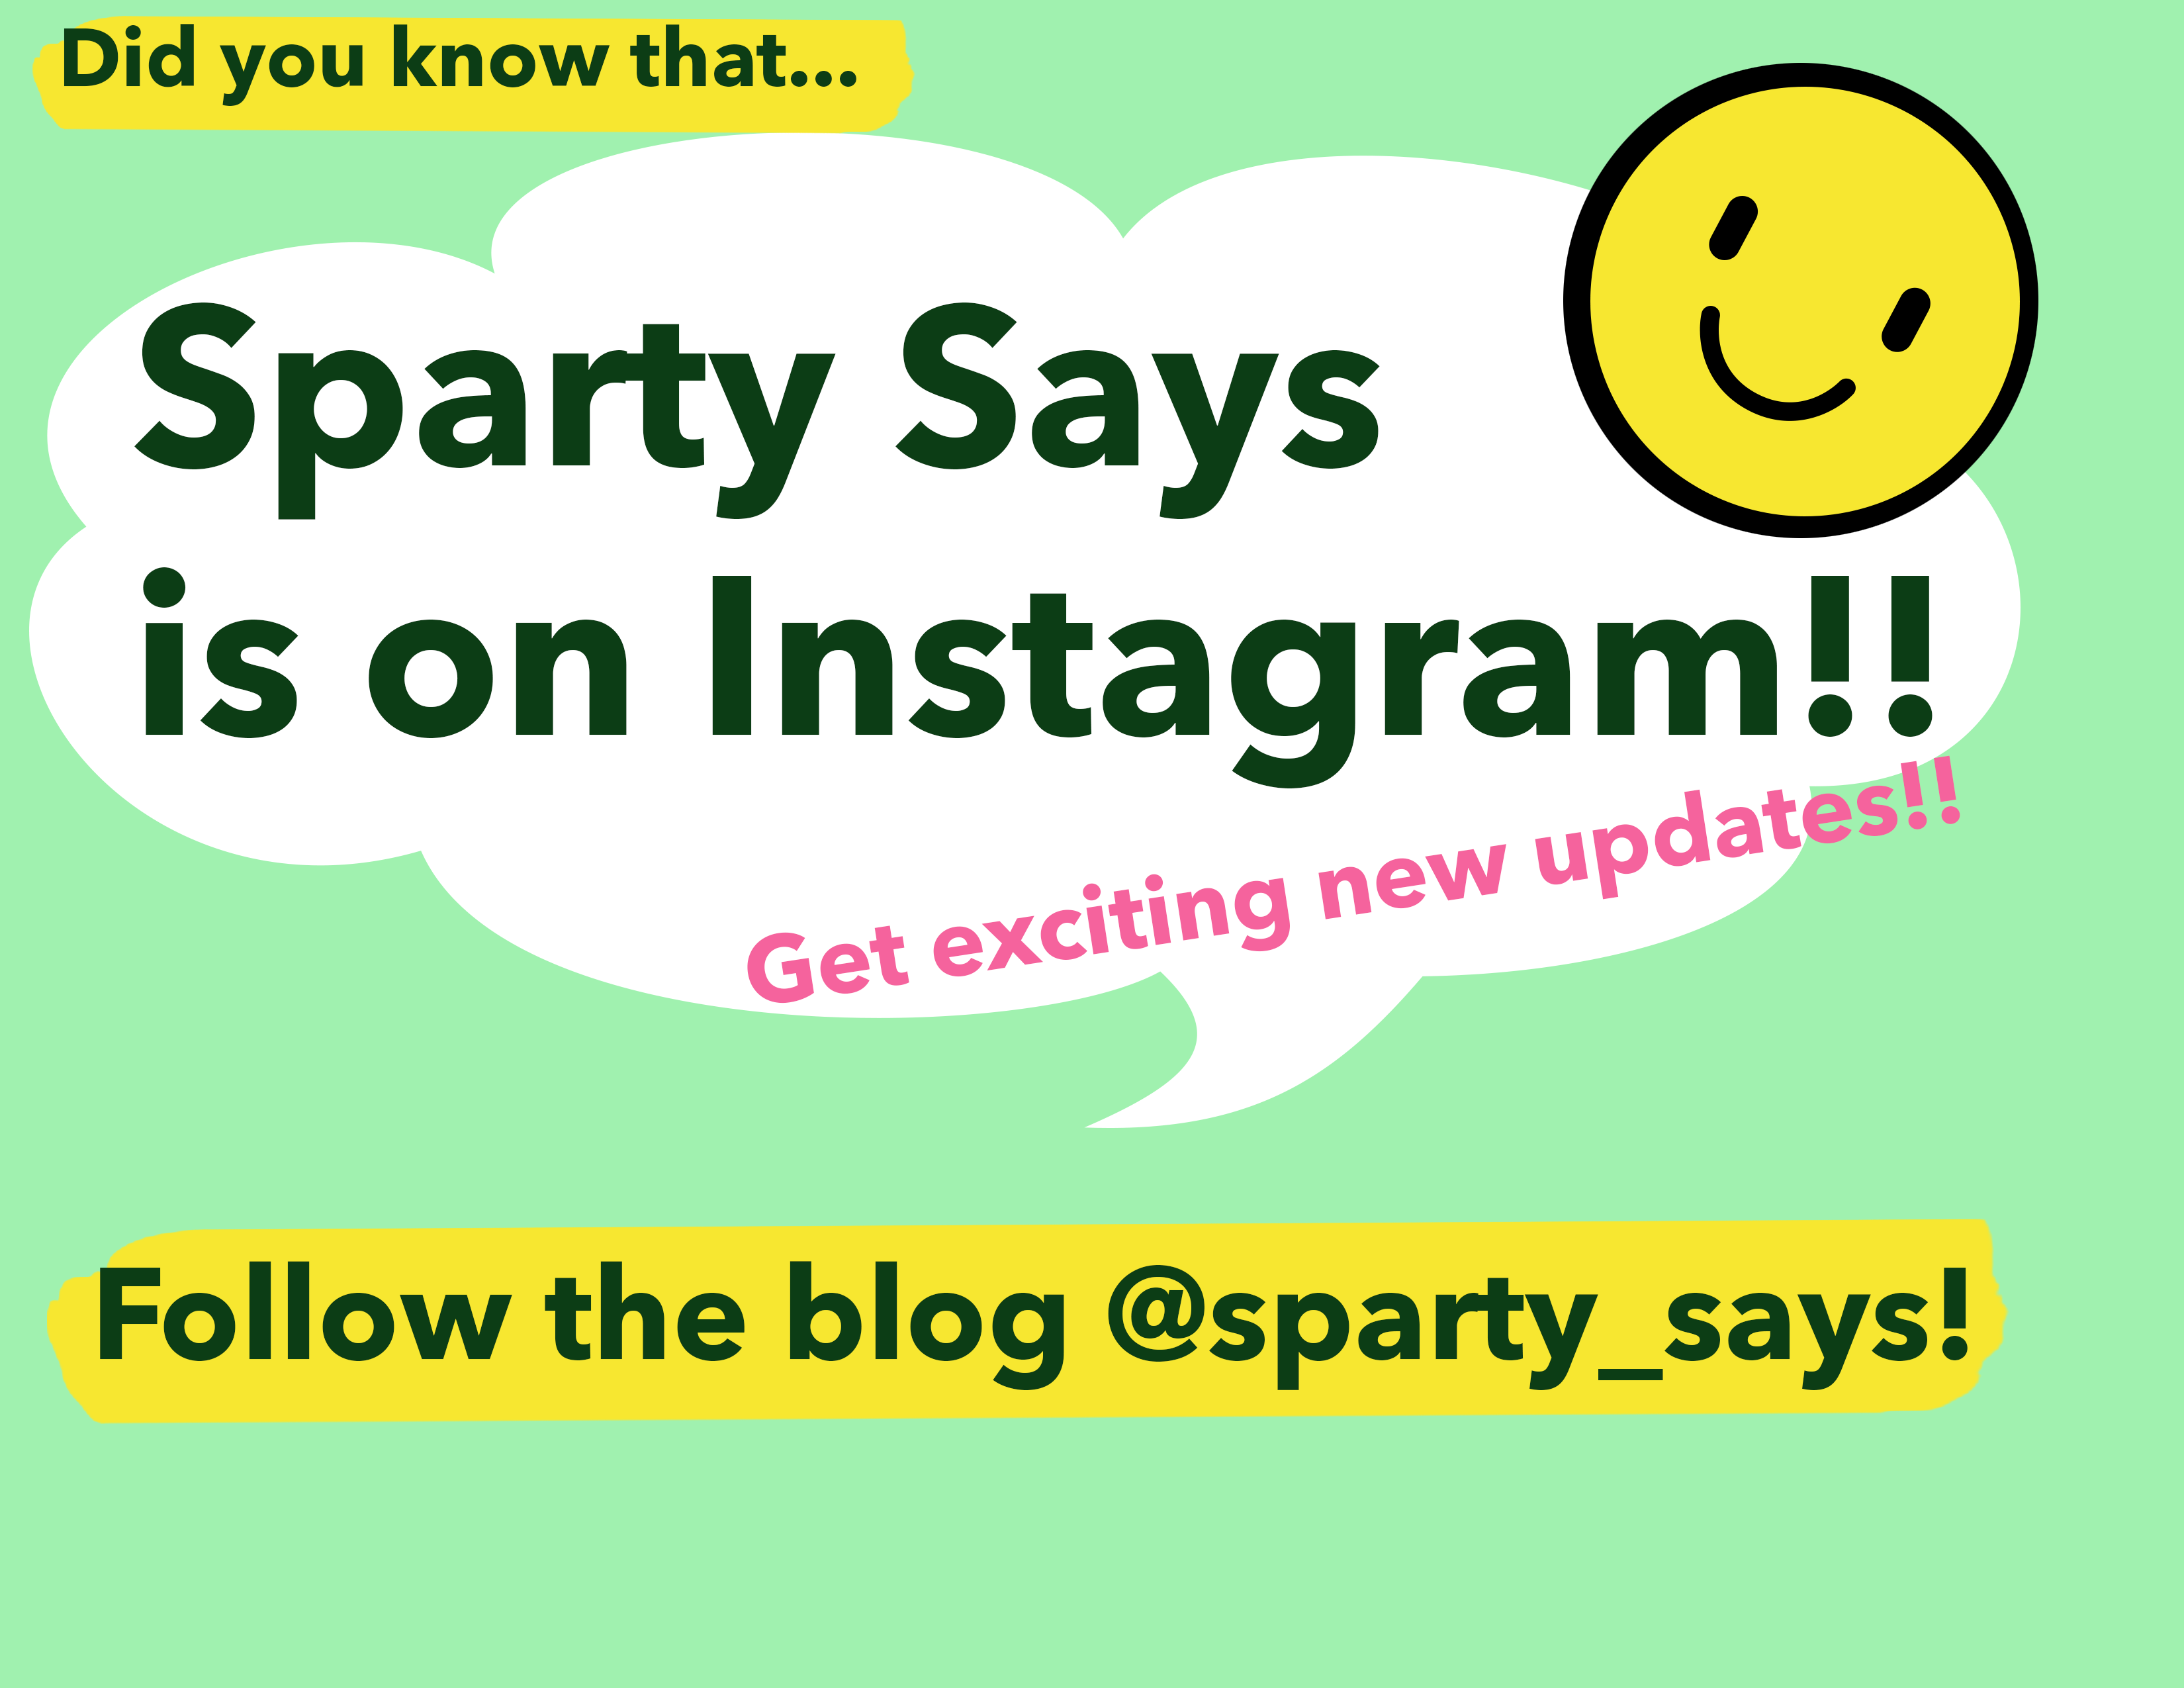 Sparty Says is on Instagram!